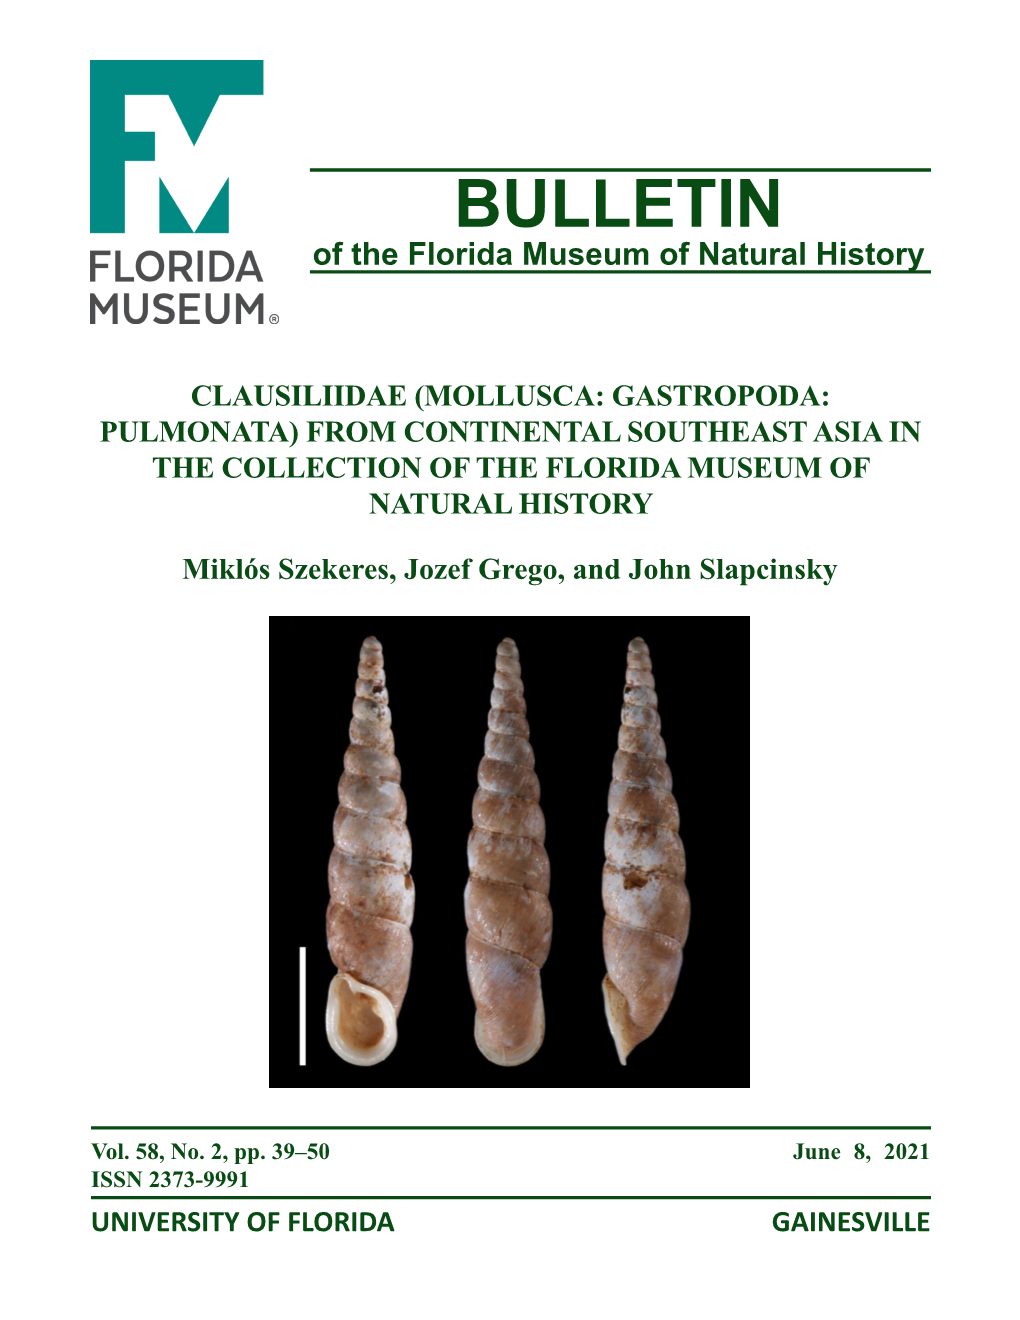 BULLETIN of the Florida Museum of Natural History